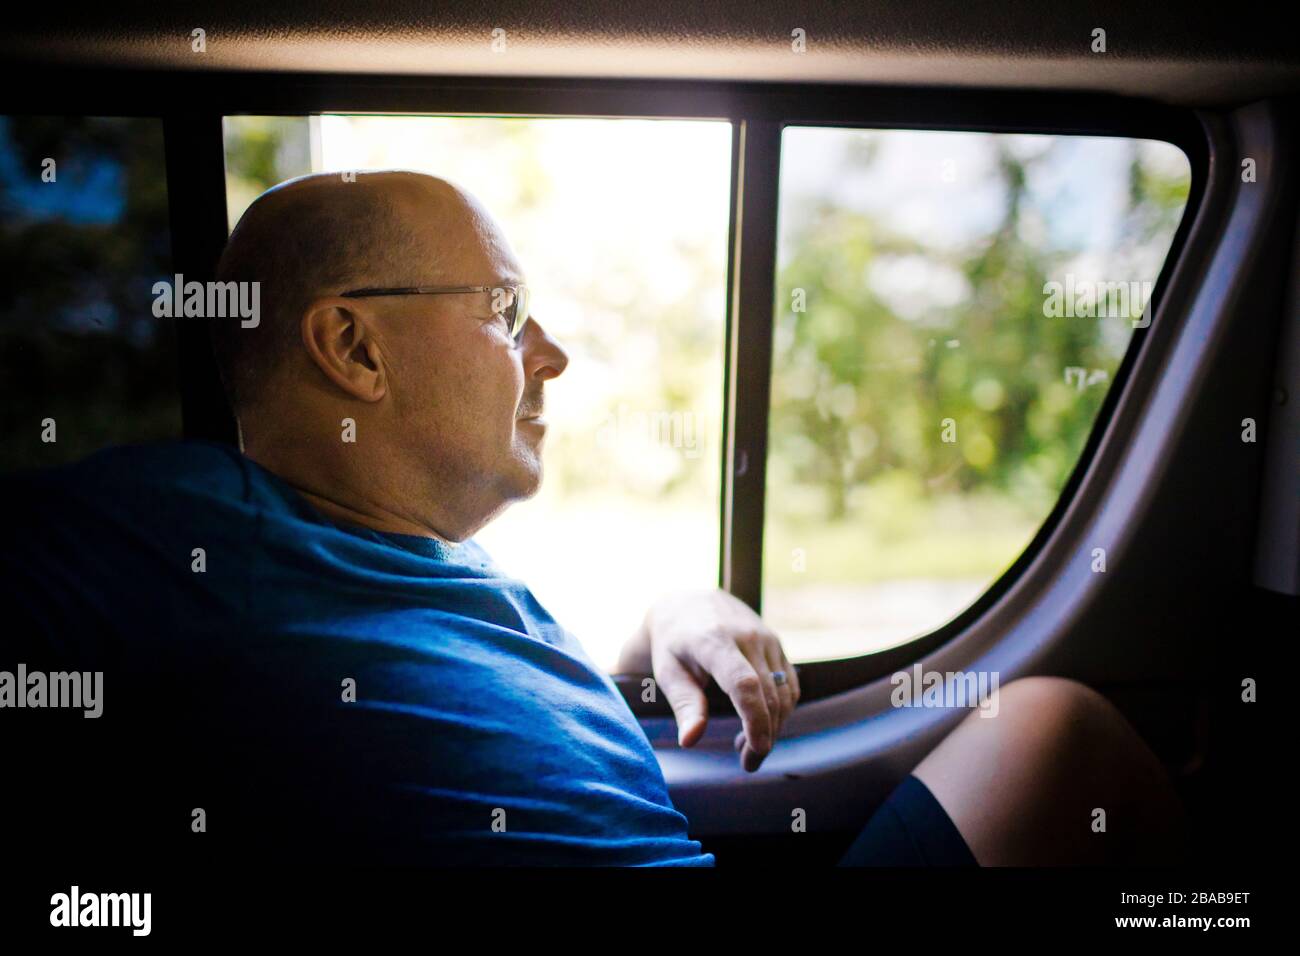 Relaxed retired man sits next to window in back of vehicle. Stock Photo